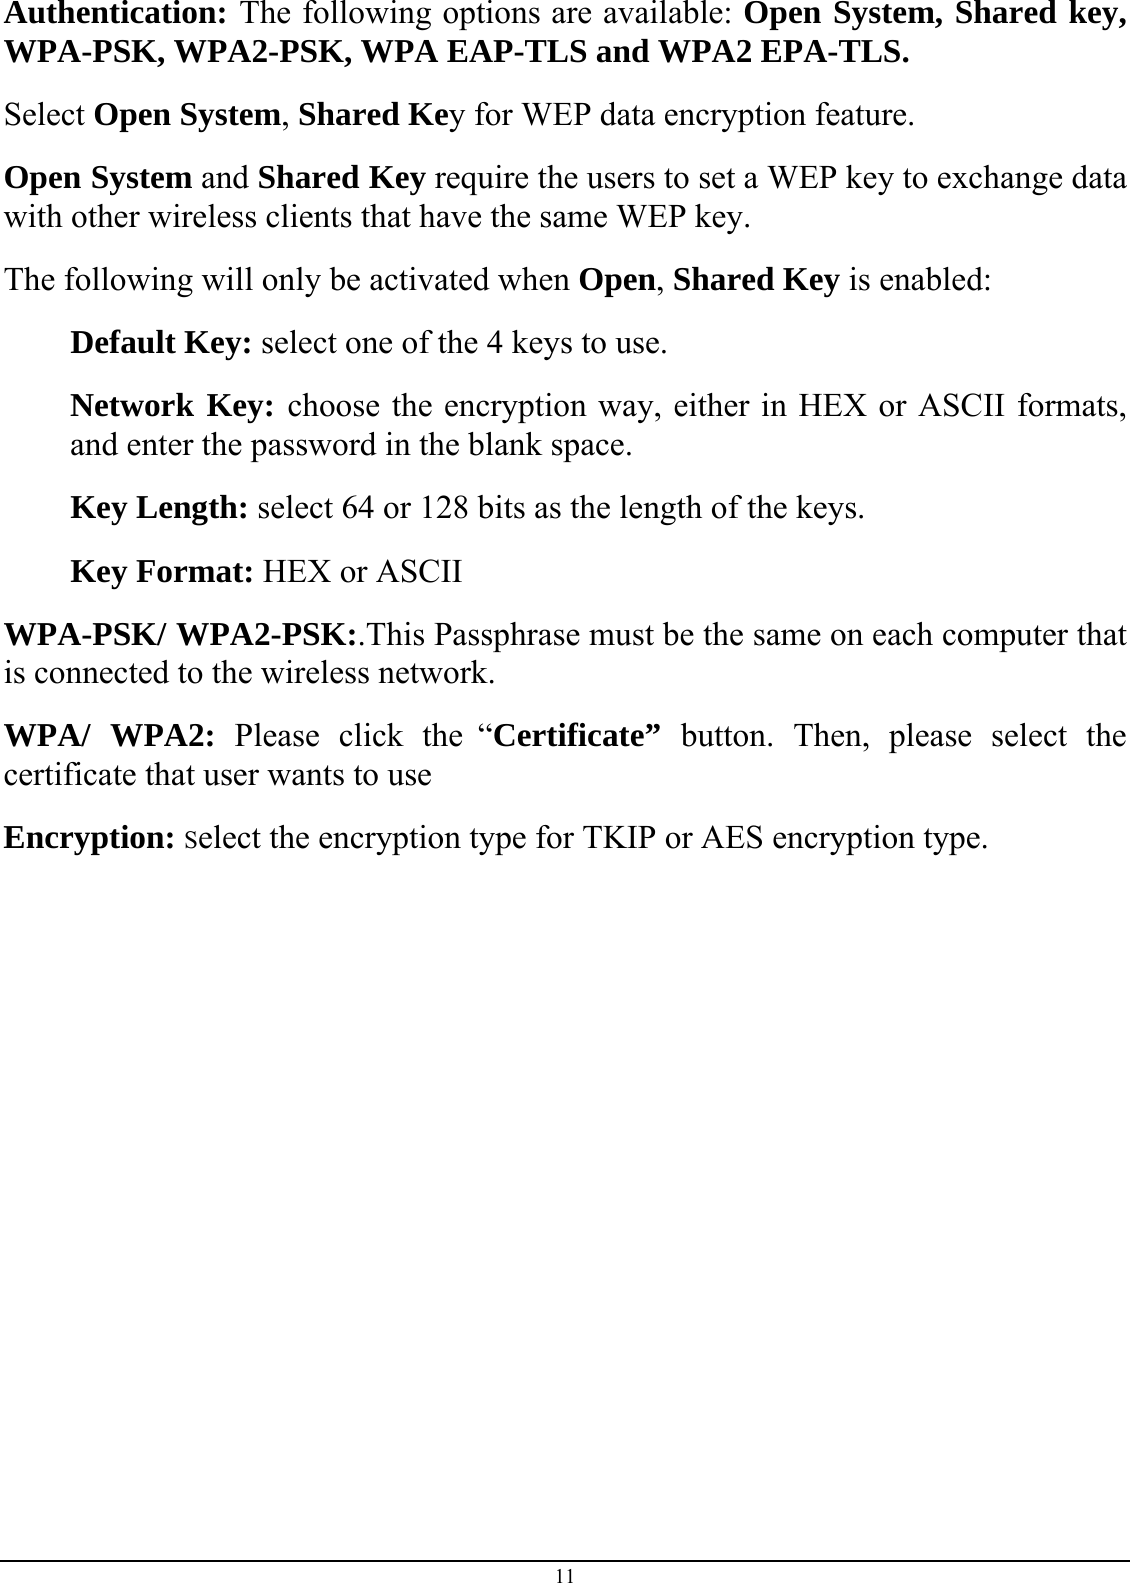 Authentication: The following options are available: Open System, Shared key, WPA-PSK, WPA2-PSK, WPA EAP-TLS and WPA2 EPA-TLS.  Select Open System, Shared Key for WEP data encryption feature. Open System and Shared Key require the users to set a WEP key to exchange data with other wireless clients that have the same WEP key. The following will only be activated when Open, Shared Key is enabled: Default Key: select one of the 4 keys to use. Network Key: choose the encryption way, either in HEX or ASCII formats, and enter the password in the blank space. Key Length: select 64 or 128 bits as the length of the keys. Key Format: HEX or ASCII  WPA-PSK/ WPA2-PSK:.This Passphrase must be the same on each computer that is connected to the wireless network. WPA/ WPA2: Please click the “Certificate”  button. Then, please select the certificate that user wants to use Encryption: Select the encryption type for TKIP or AES encryption type.              11 